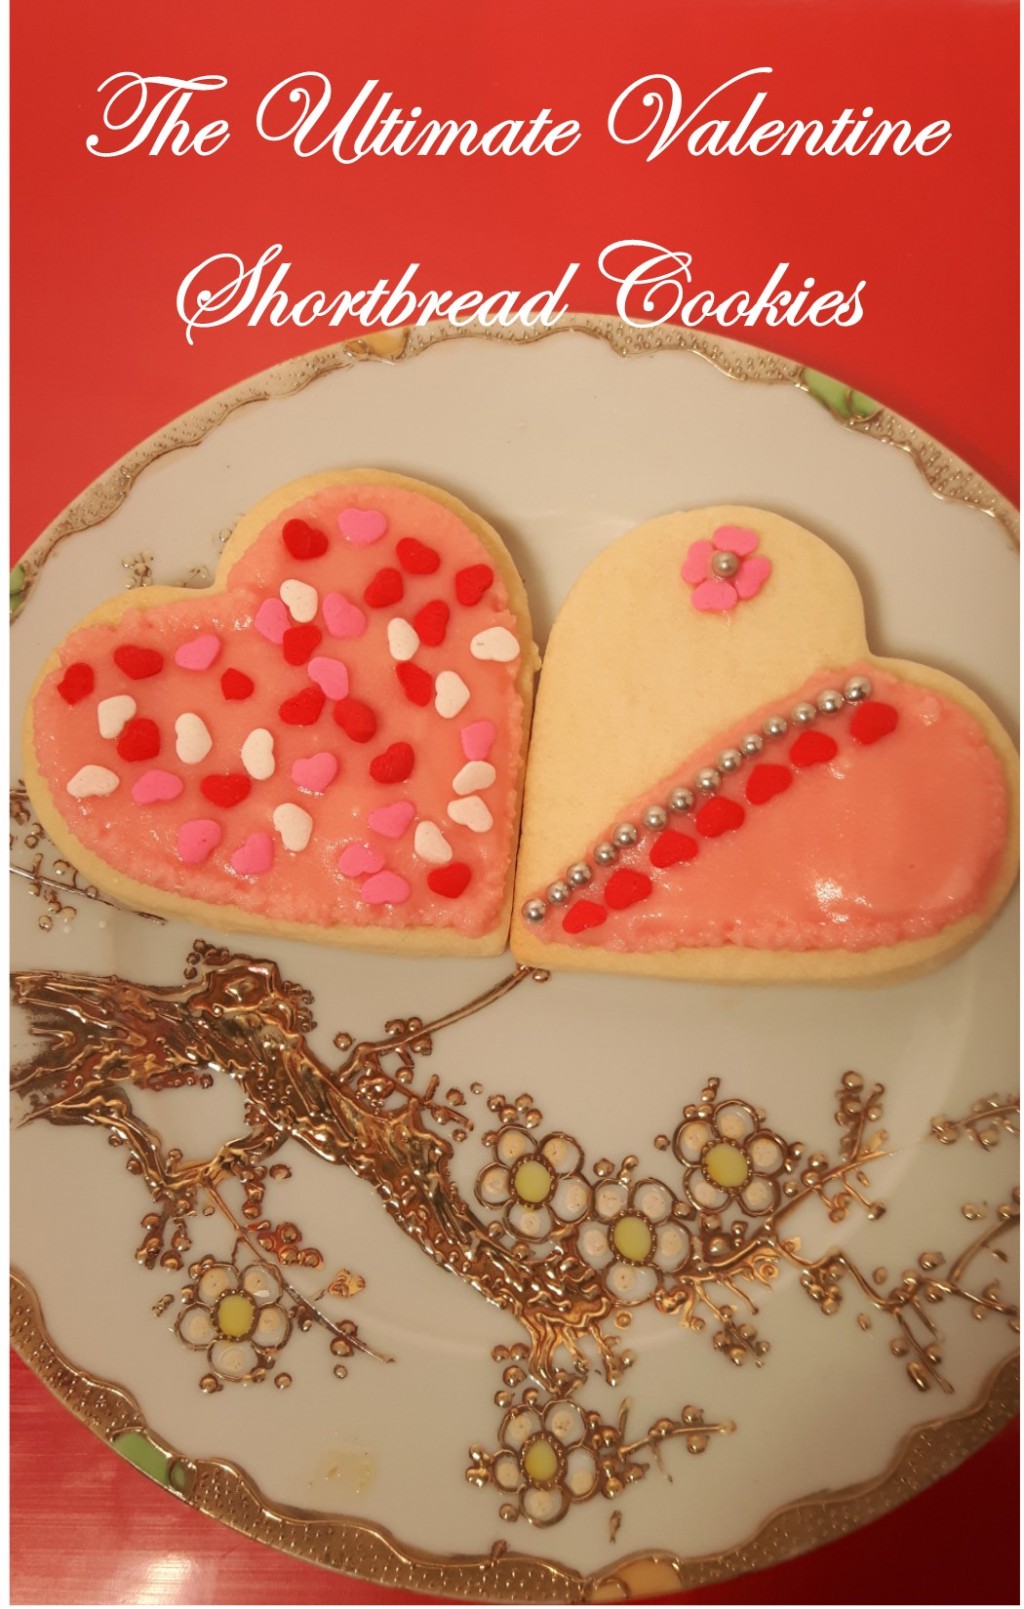 The Ultimate Valentine Shortbread Cookies | HubPages